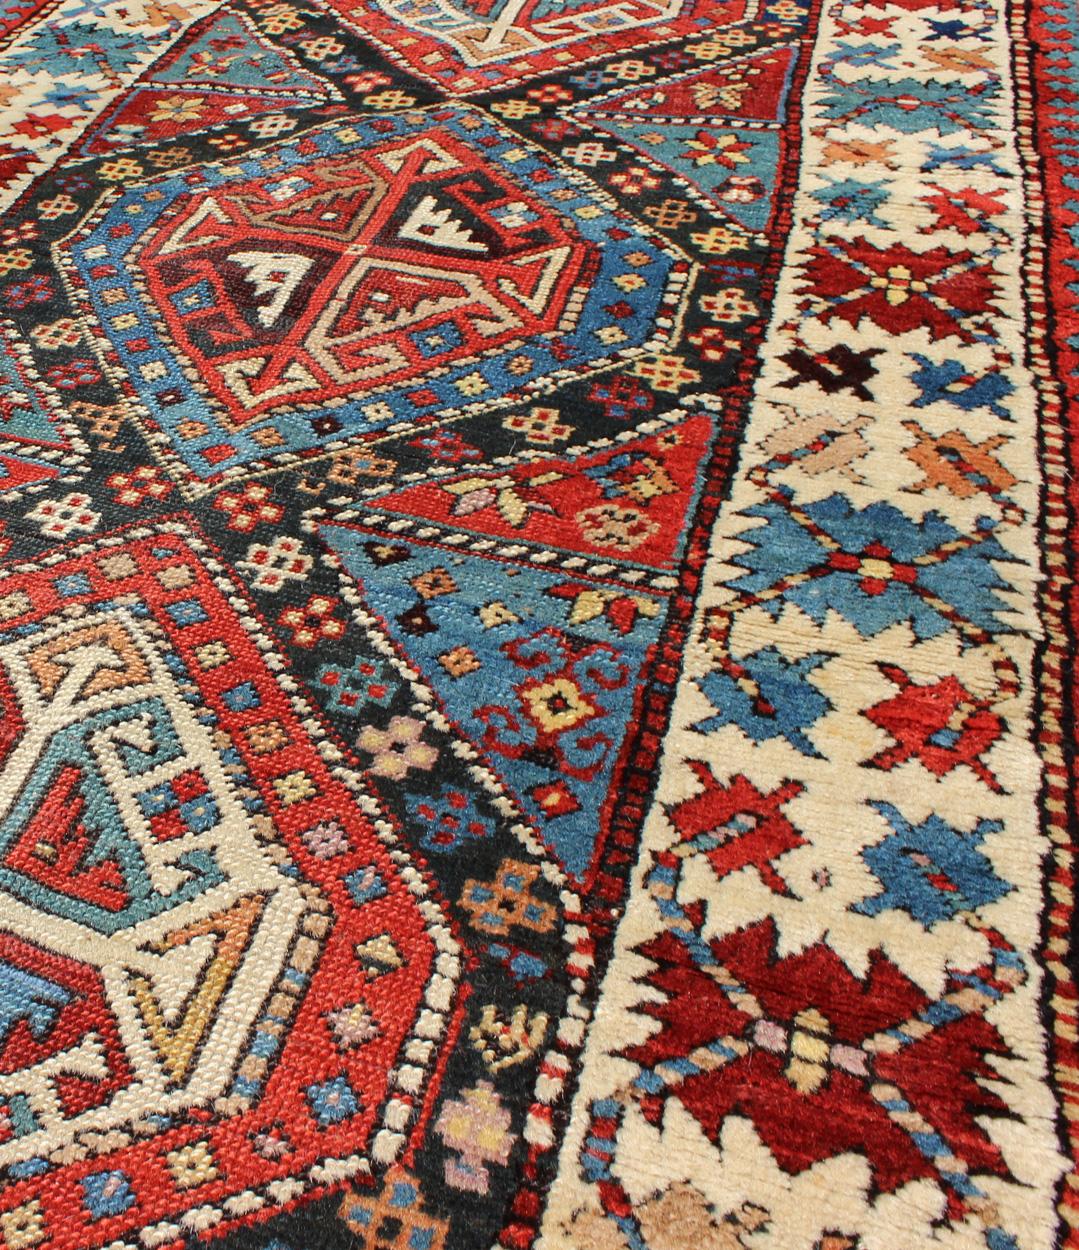 Antique Caucasian Kuba Rug with Intricate and Complex Design  In Good Condition For Sale In Atlanta, GA